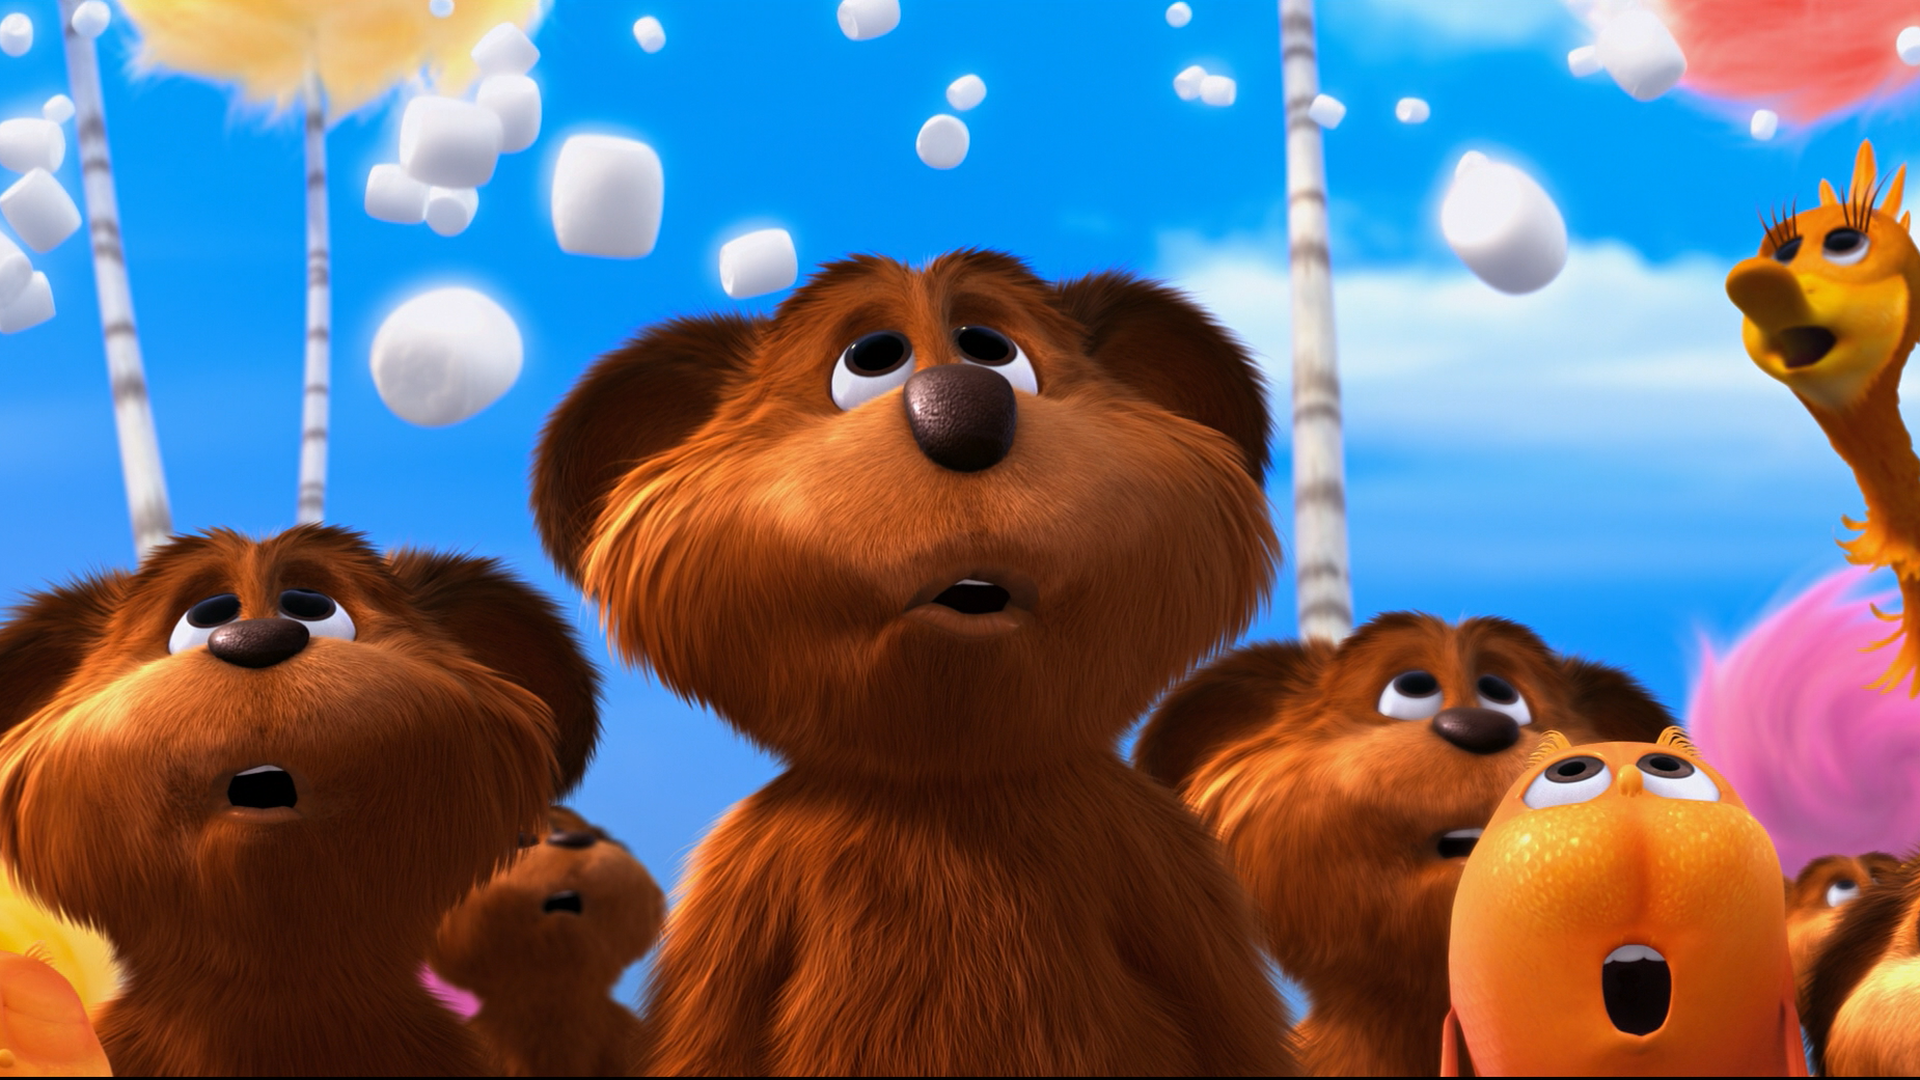 Movie The Lorax HD Wallpaper | Background Image